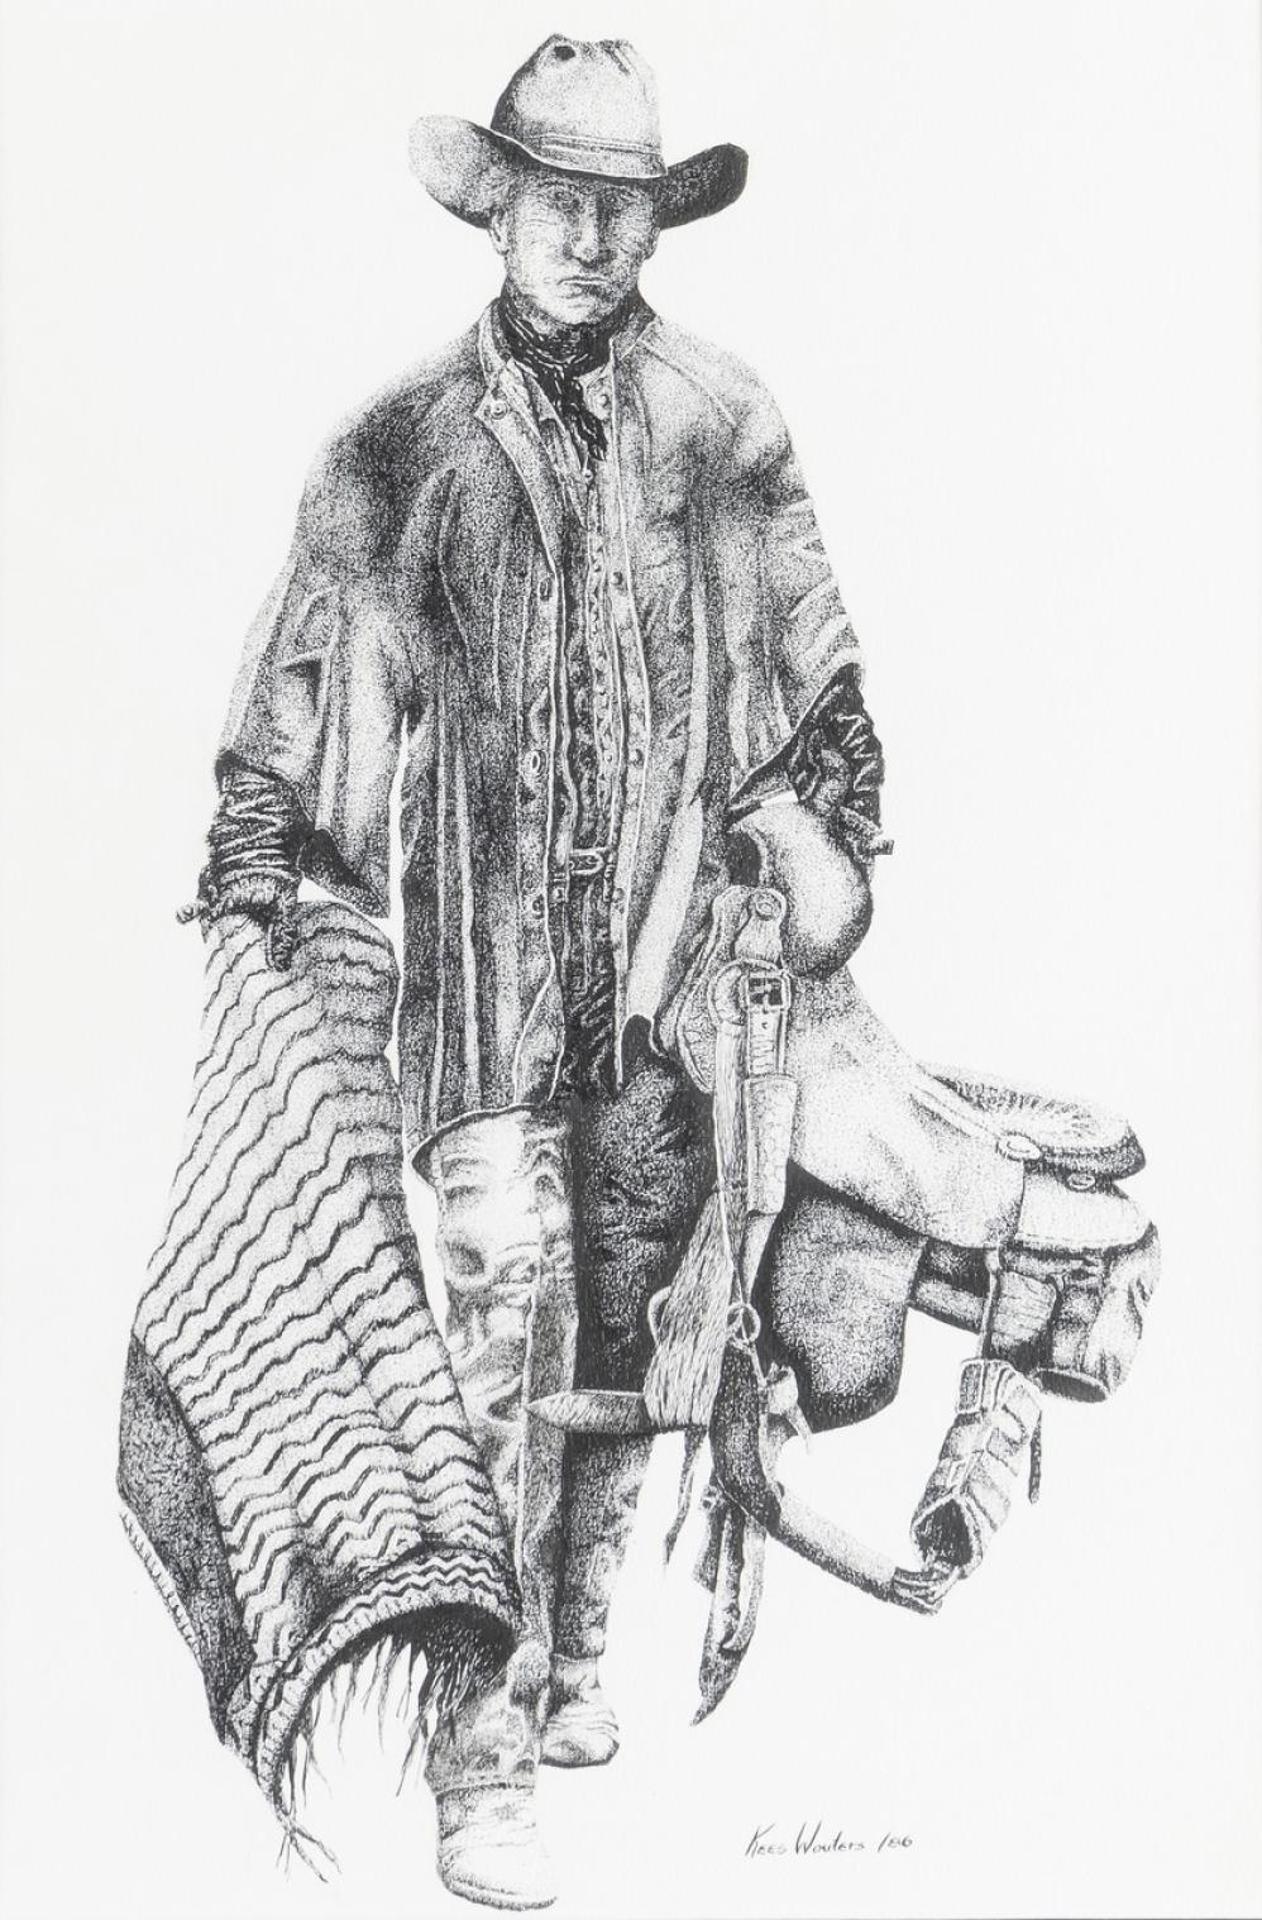 Kees Wouters - Untitled - Cowboy